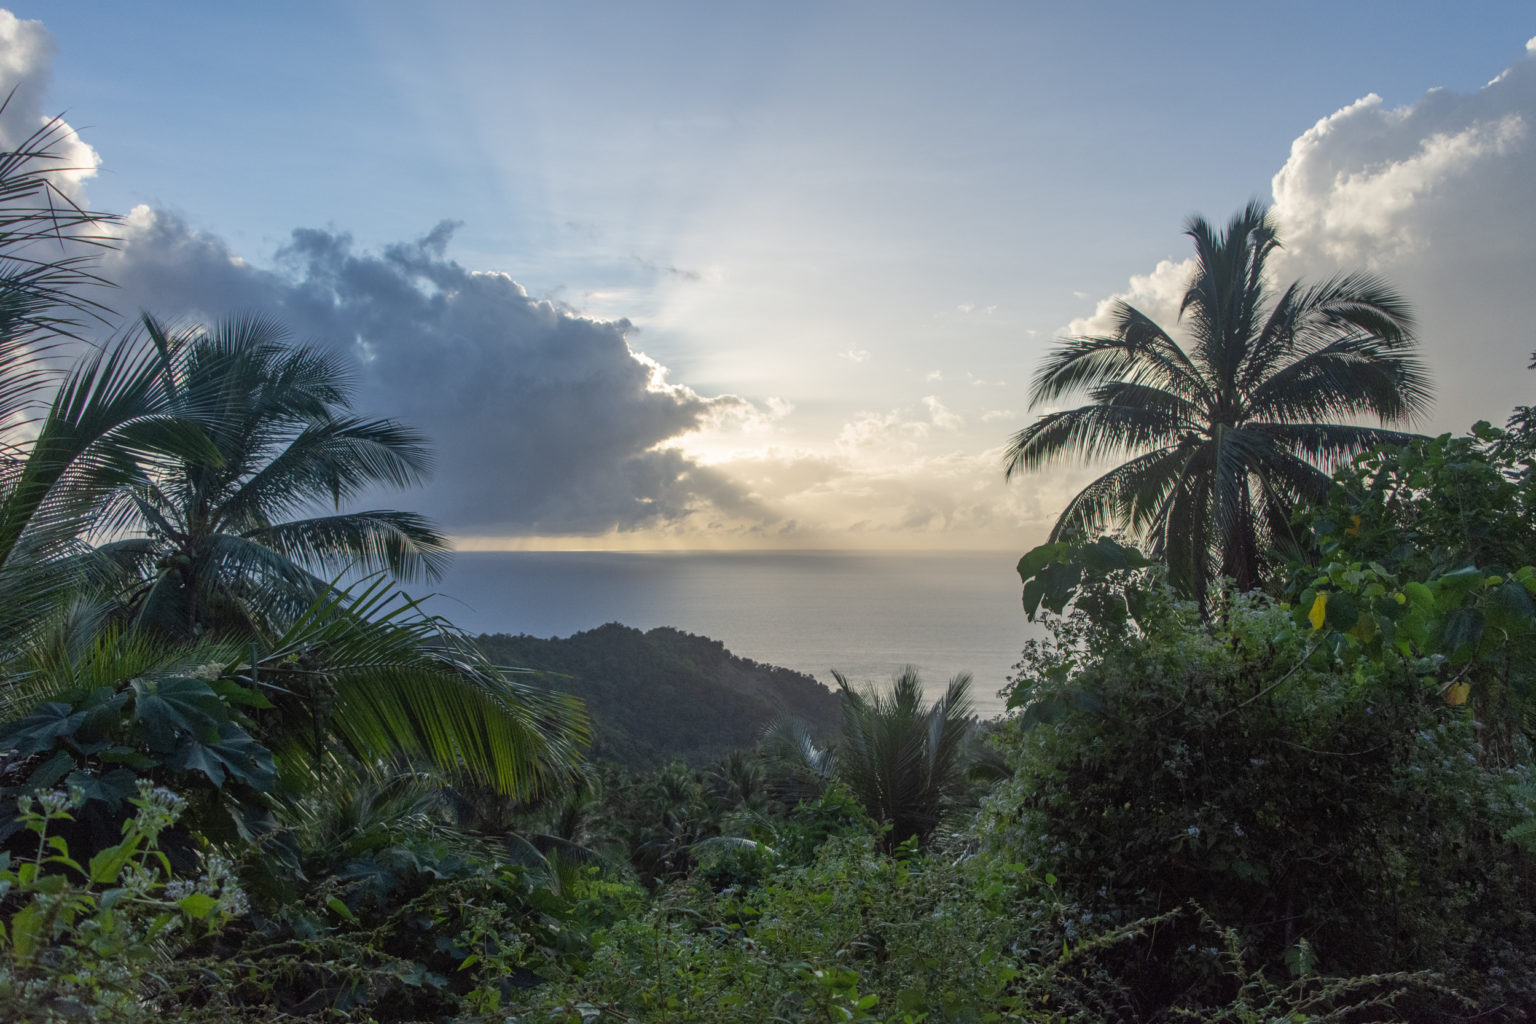 Sunrise over the Verde Island Passage, seen from trail